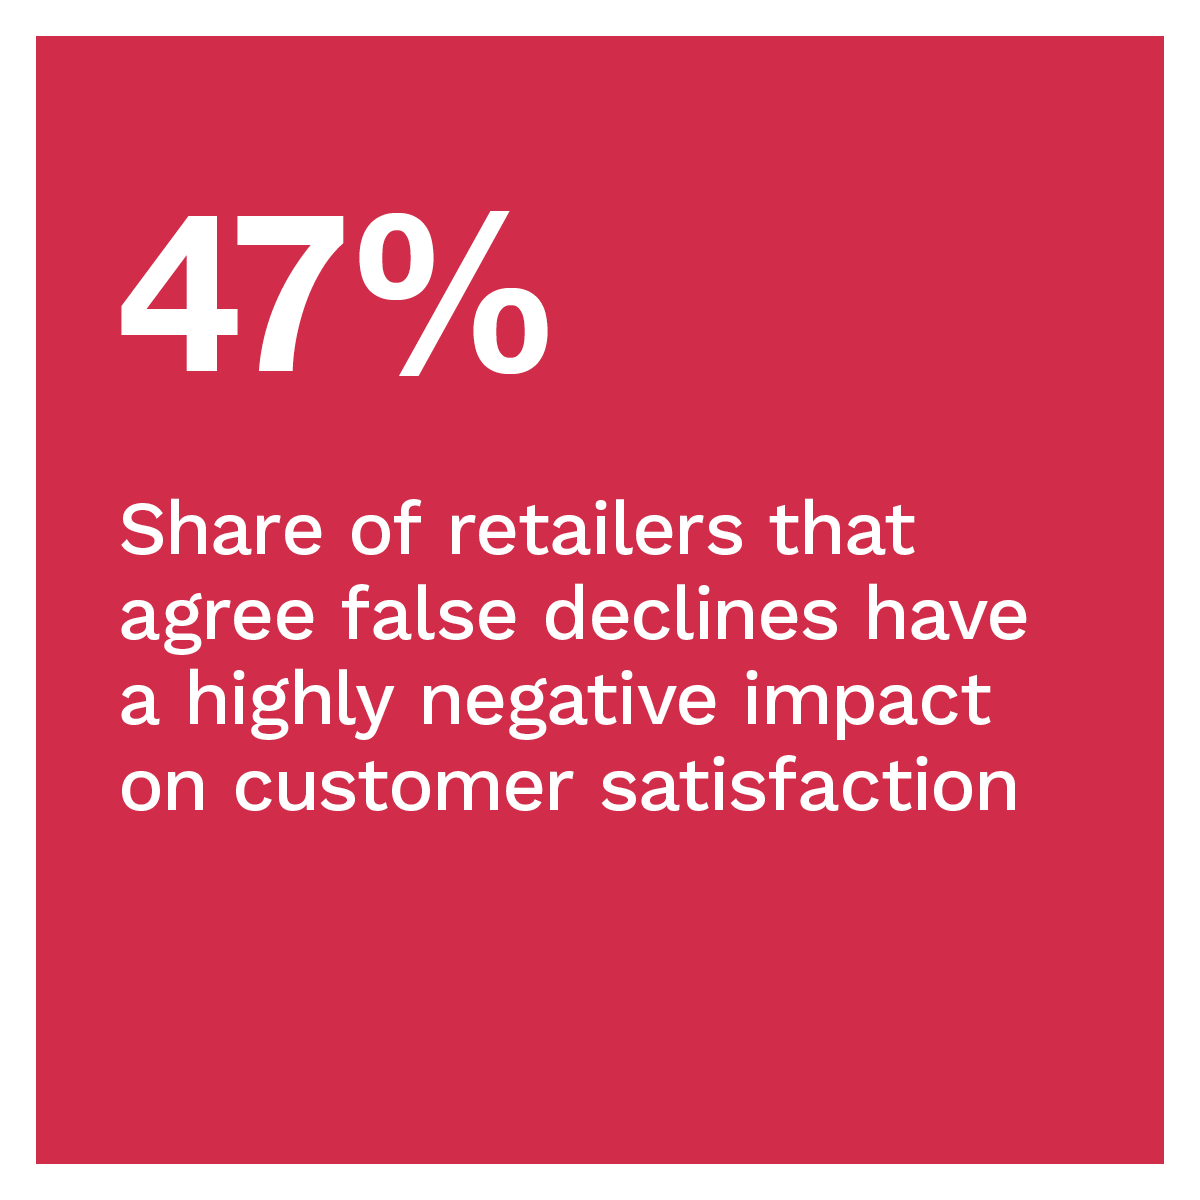 47%: Share of retailers that agree false declines have a highly negative impact on customer satisfaction